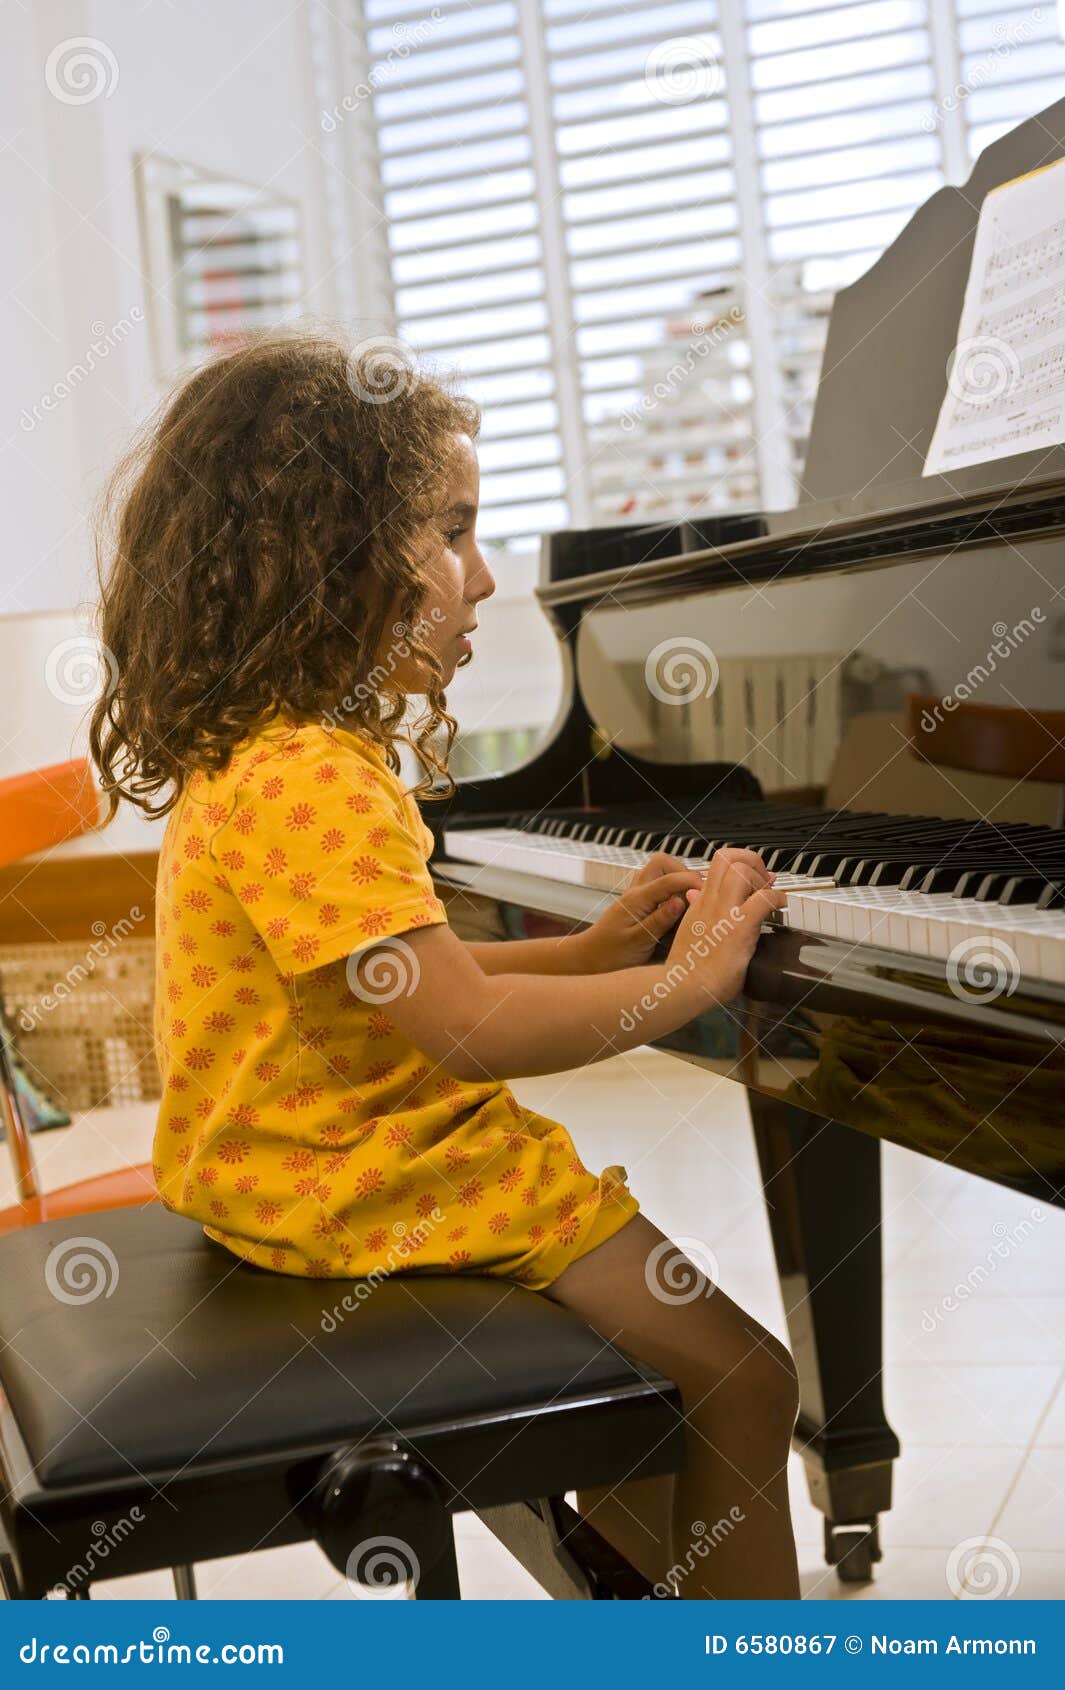 Little Girl Playing The Piano Stock Image - Image: 6580867